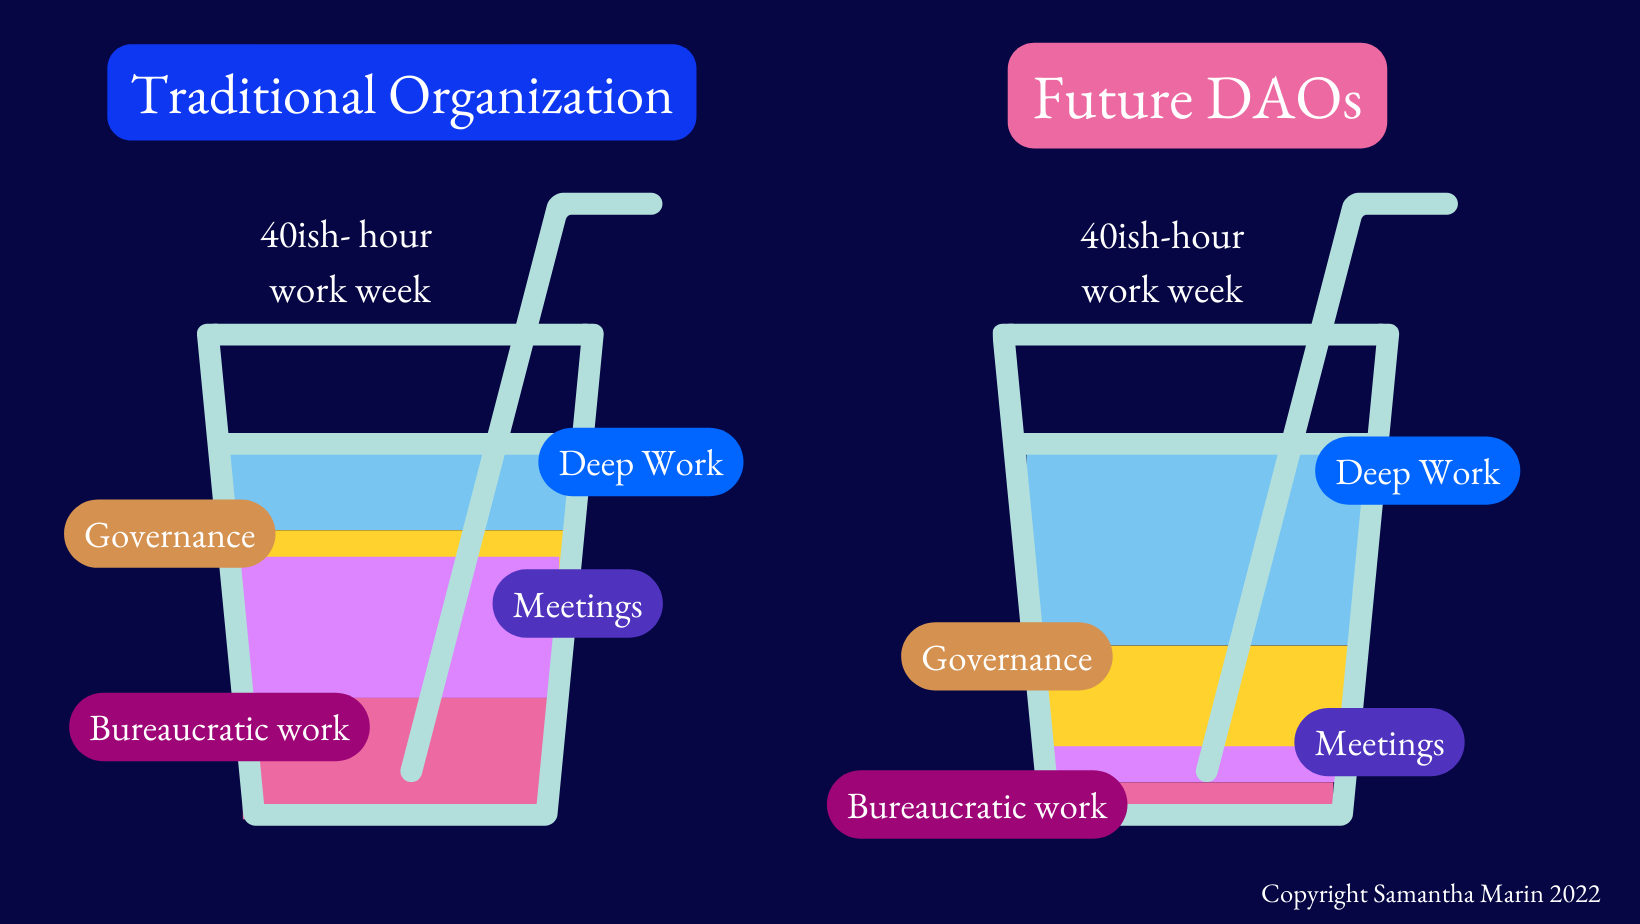 The Glass of Work in traditional organizations versus a well-optimized, future-state DAO as described in the section above.